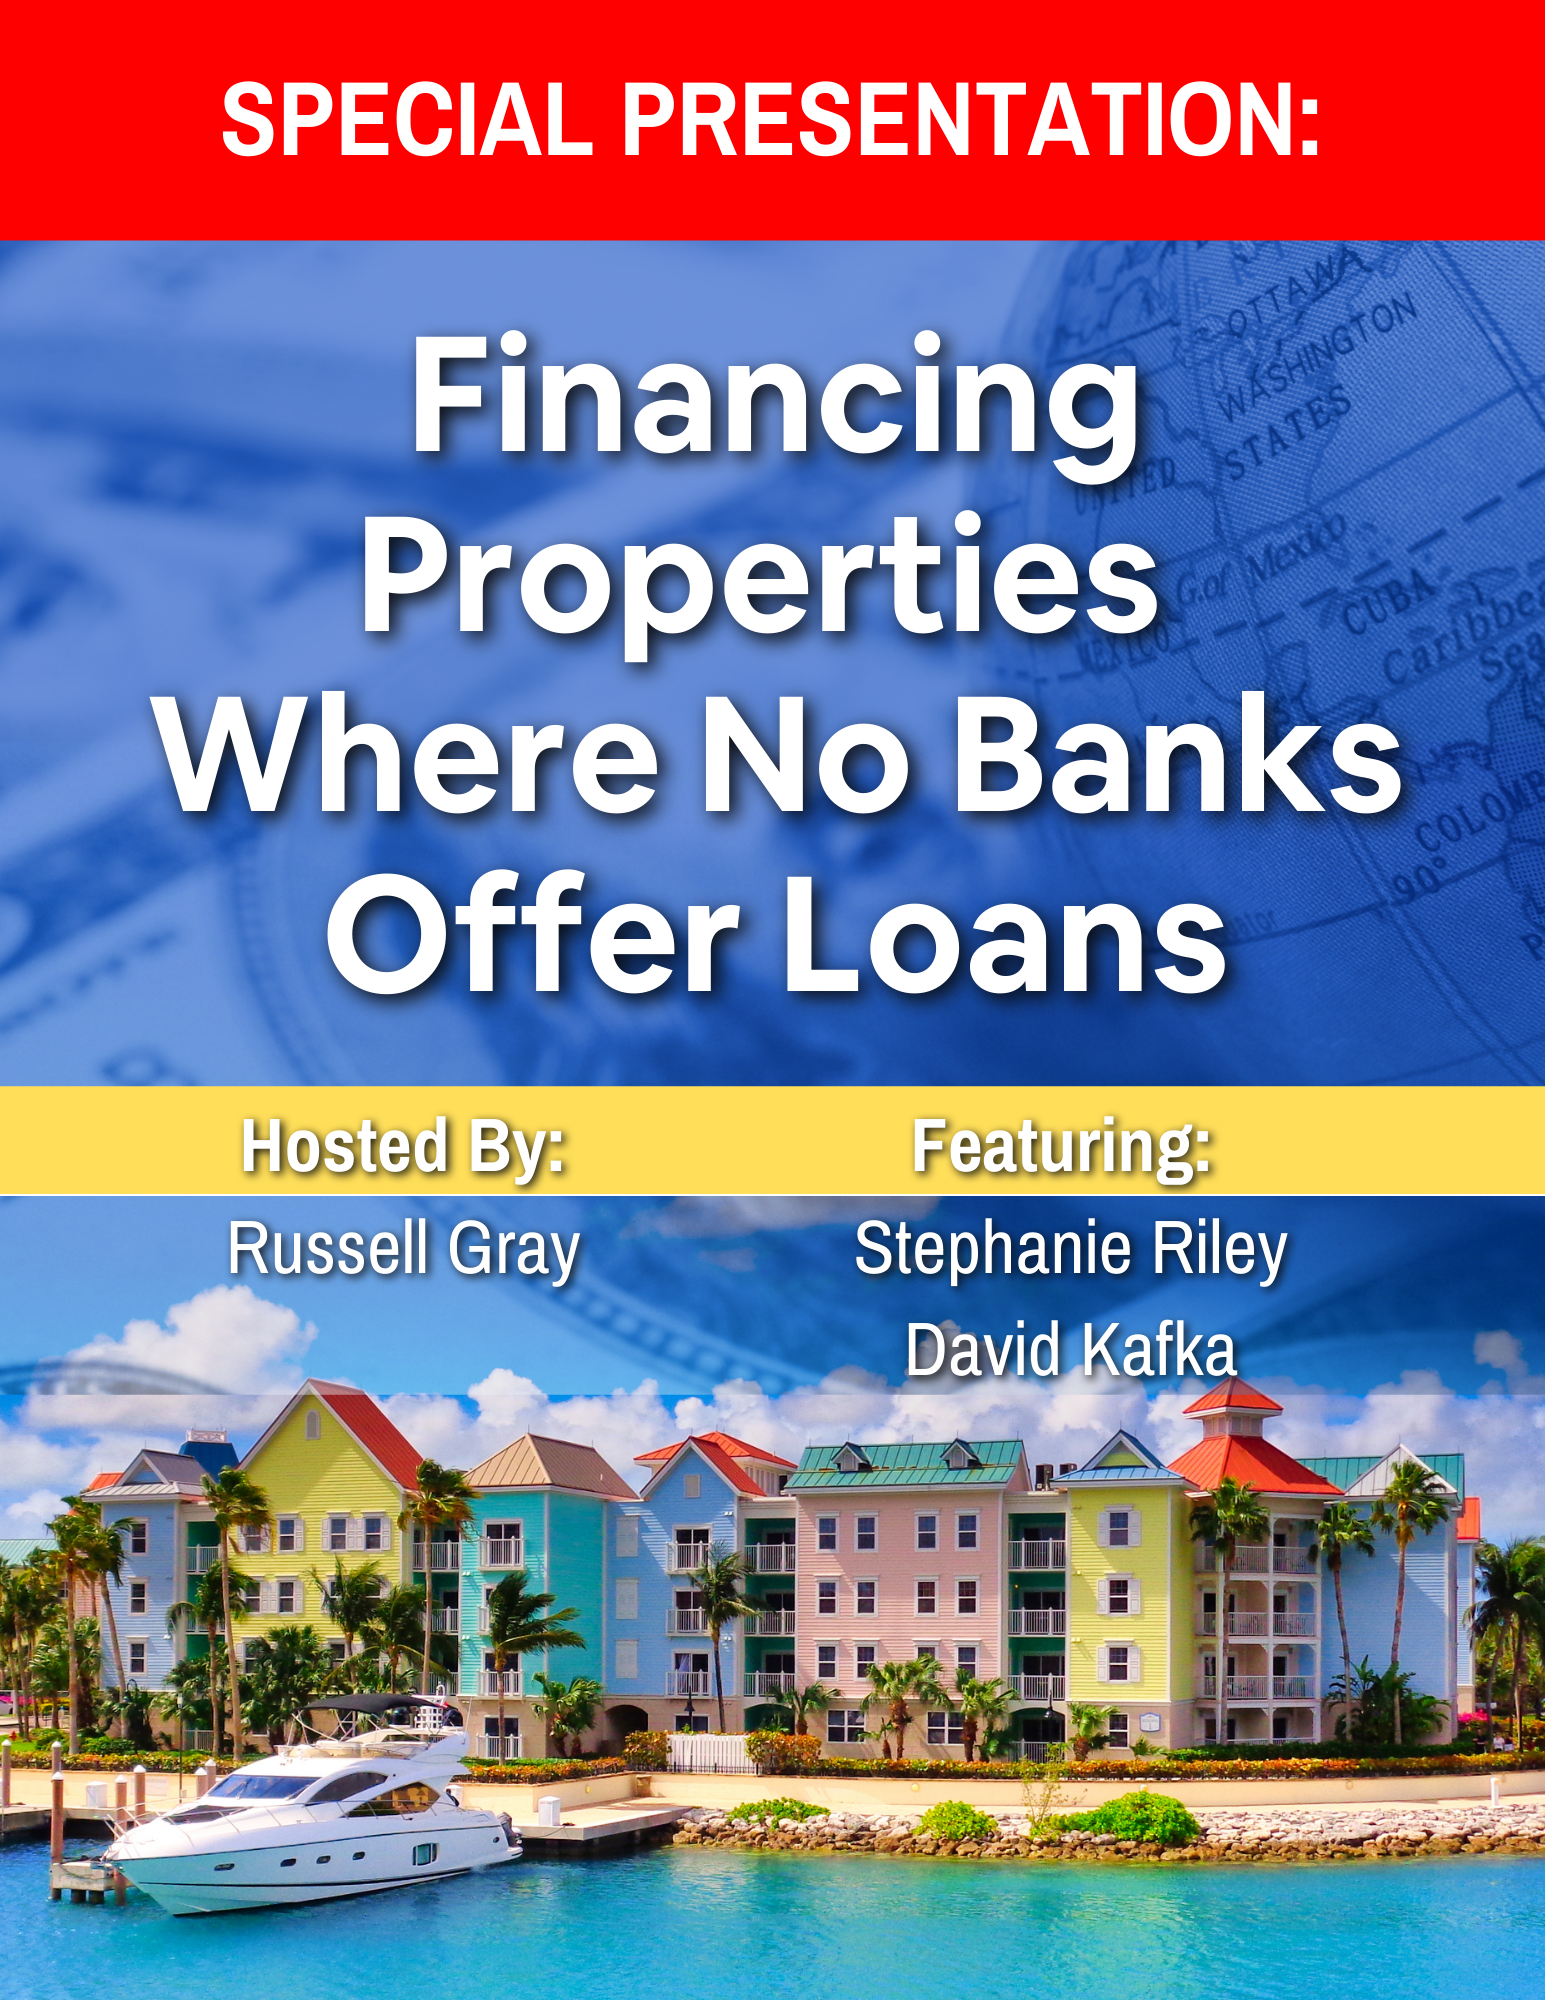 Financing Properties Where No Banks Offer Loans